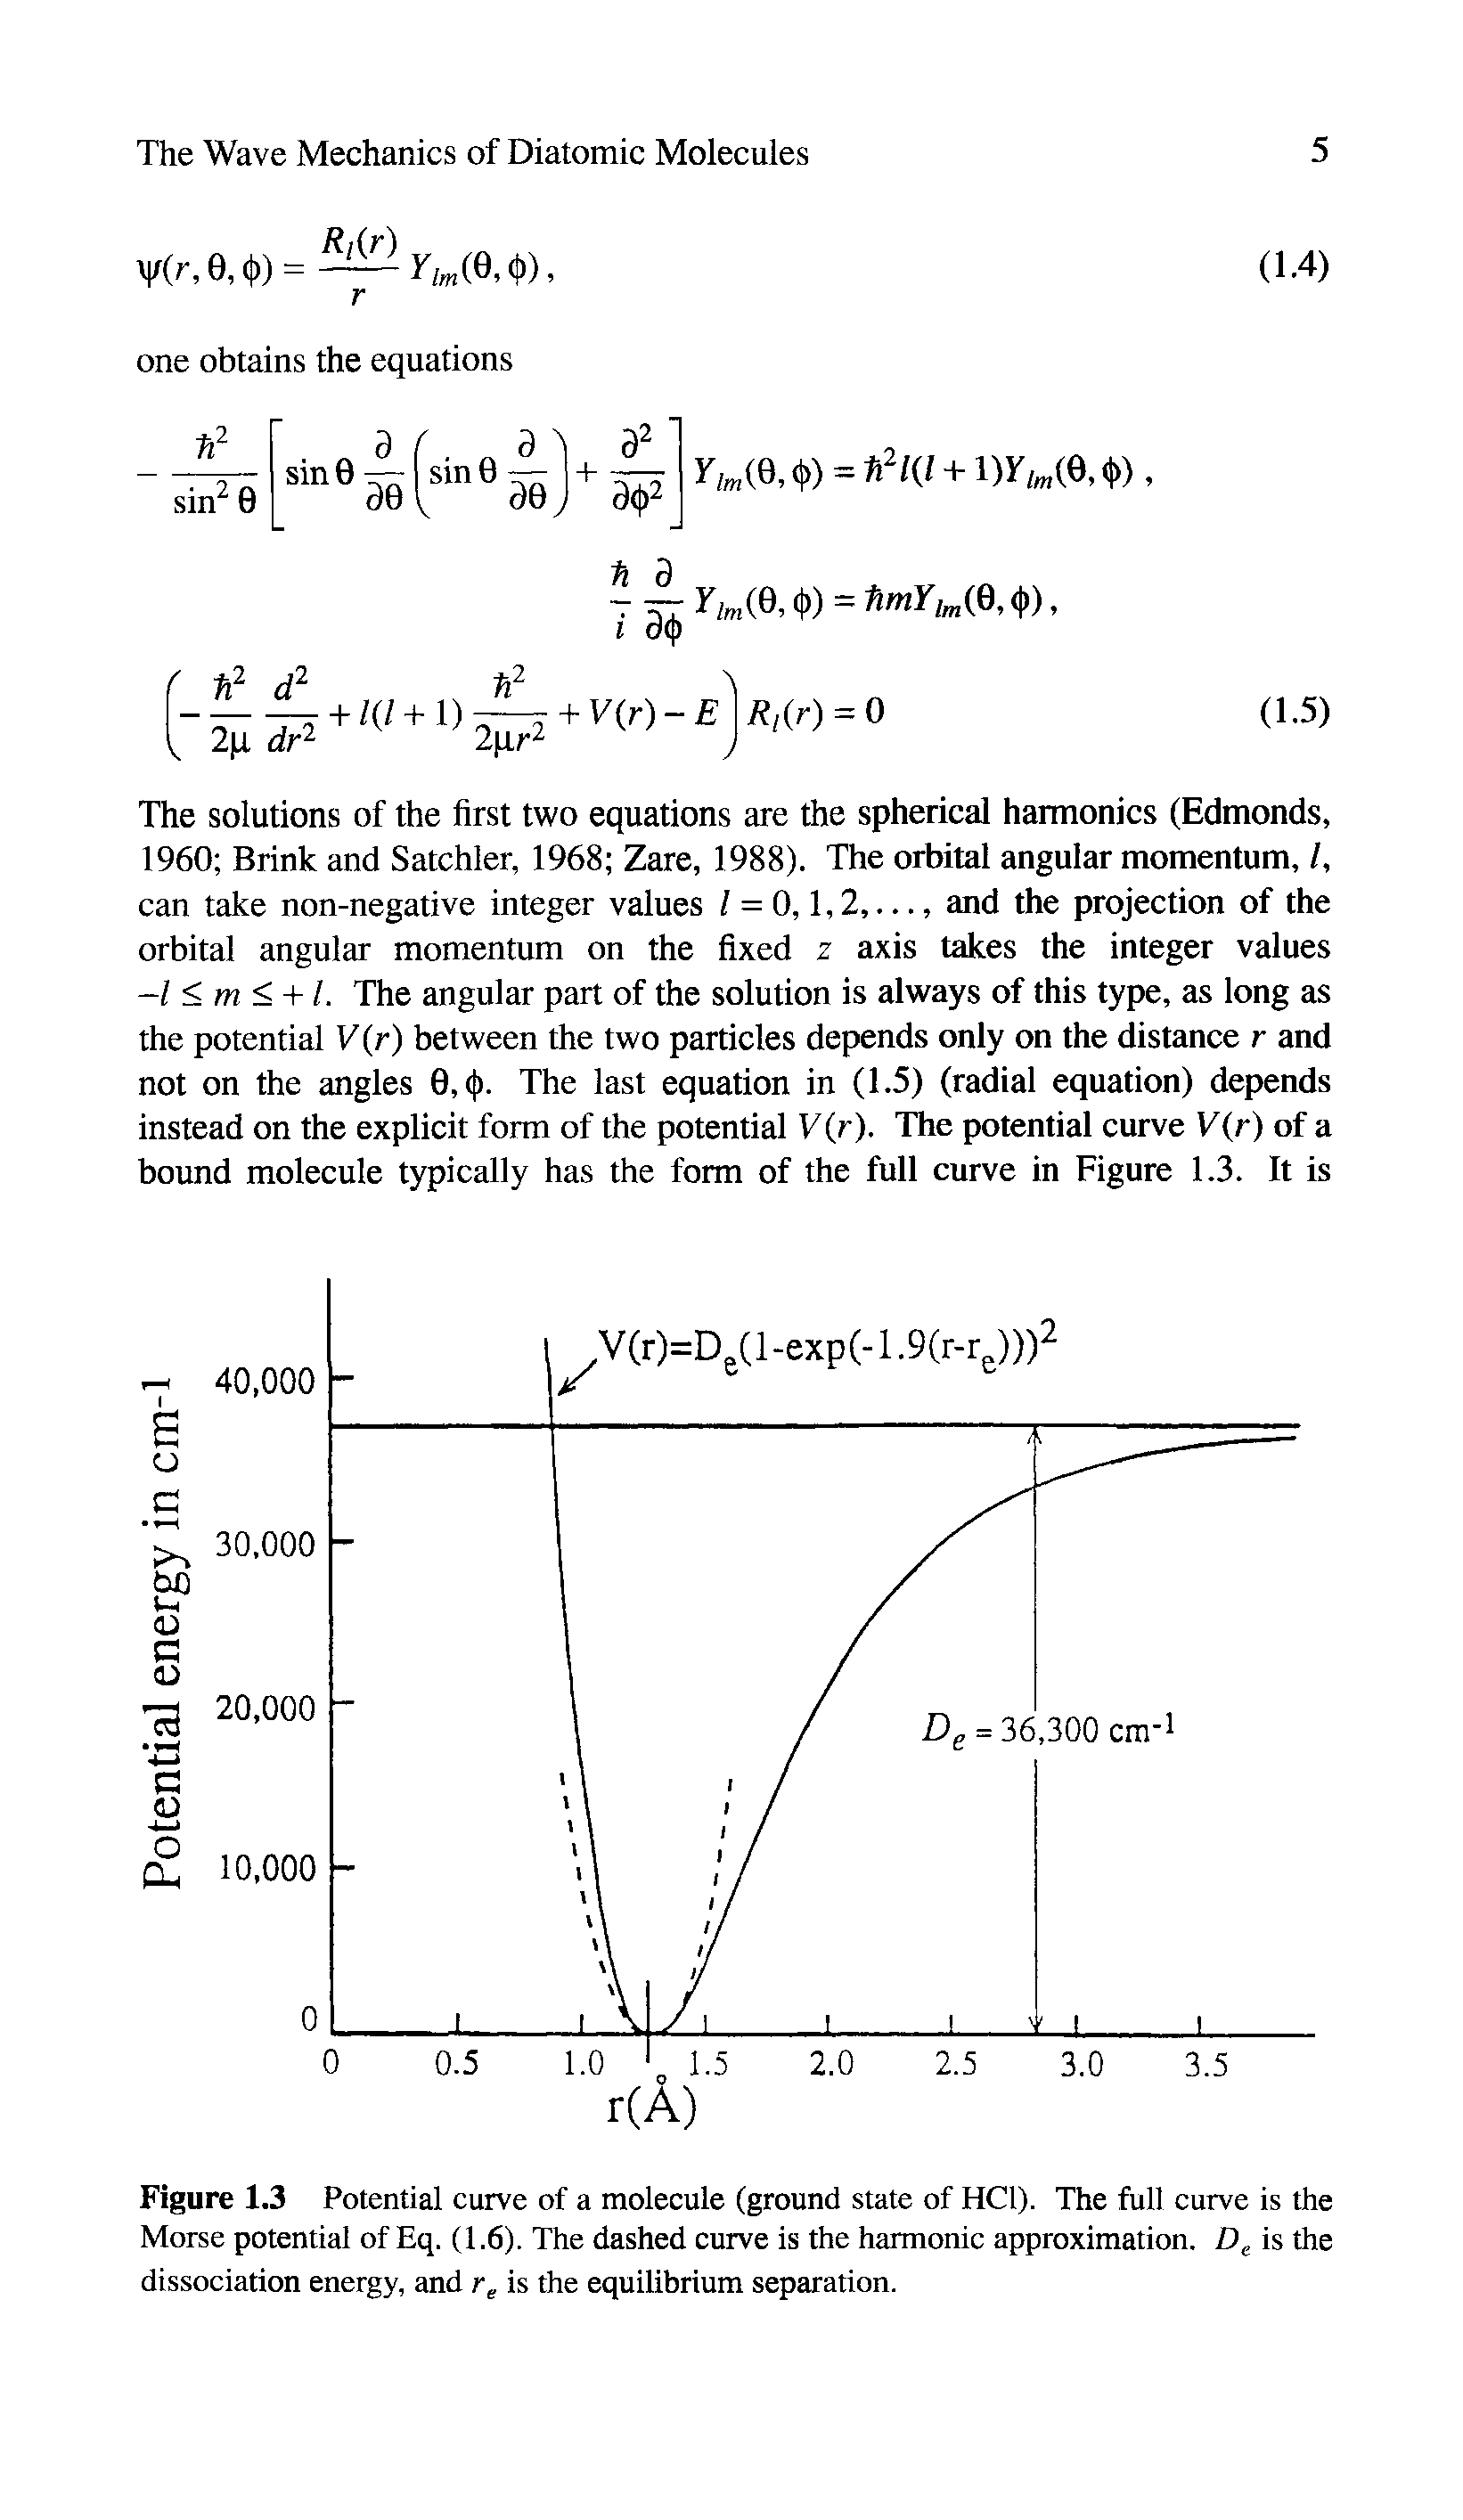 Figure 1.3 Potential curve of a molecule (ground state of HC1). The full curve is the Morse potential of Eq. (1.6). The dashed curve is the harmonic approximation. De is the dissociation energy, and re is the equilibrium separation.